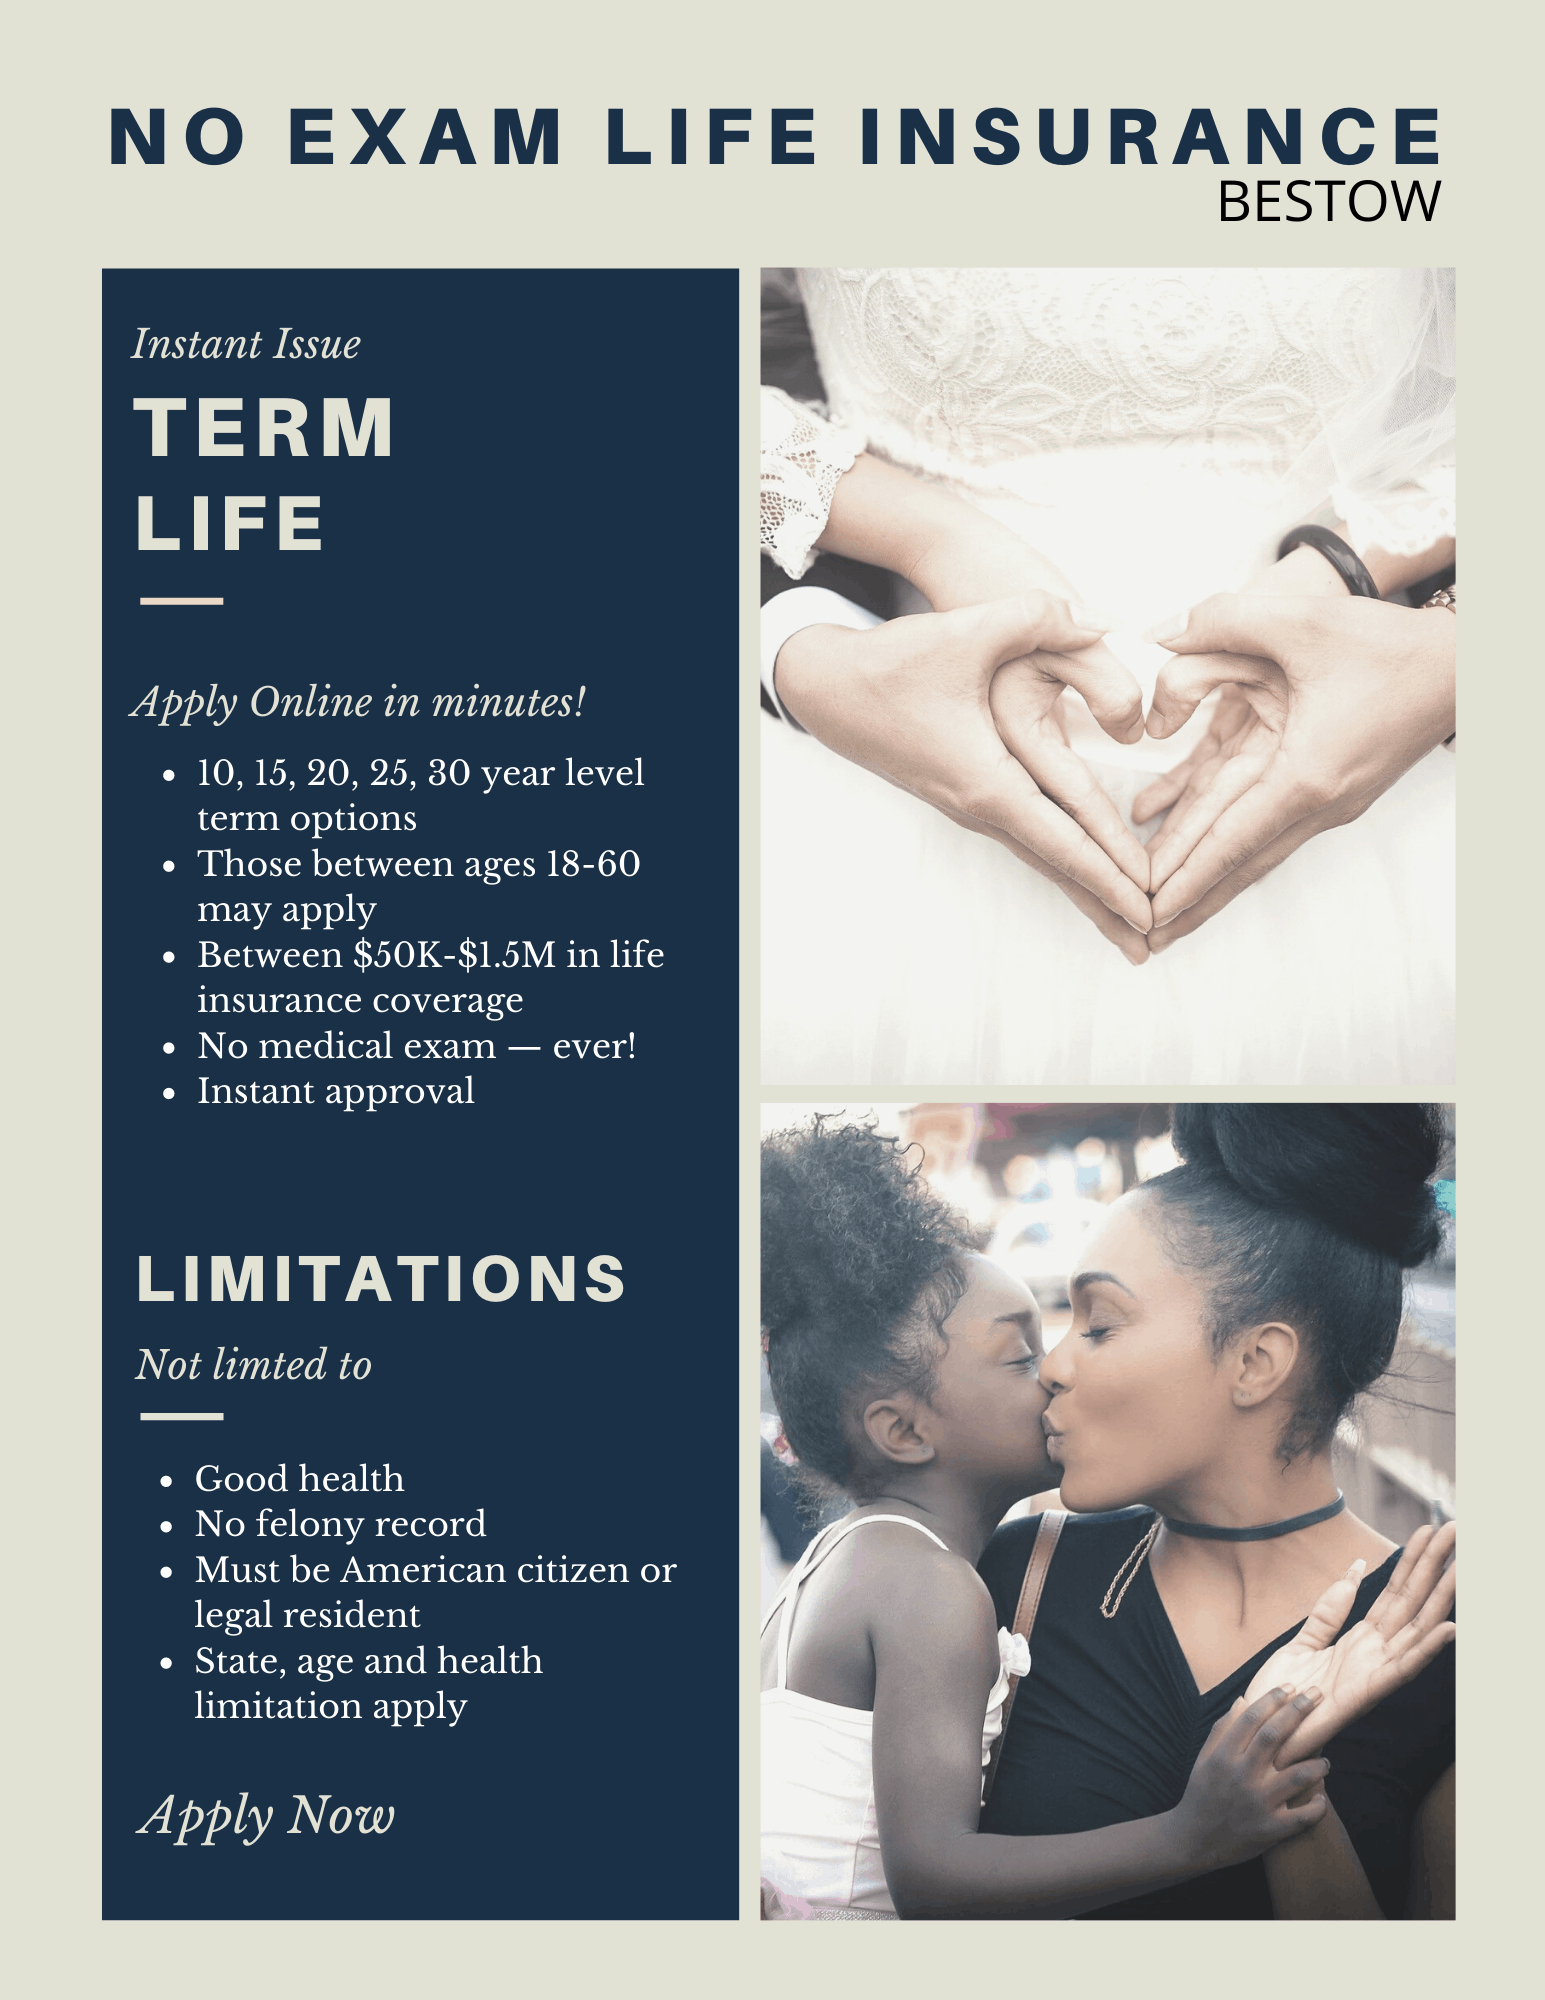 Click here to apply. Bestow Instant Issue life insurance. Term life insurance for up to $1,500,000. 